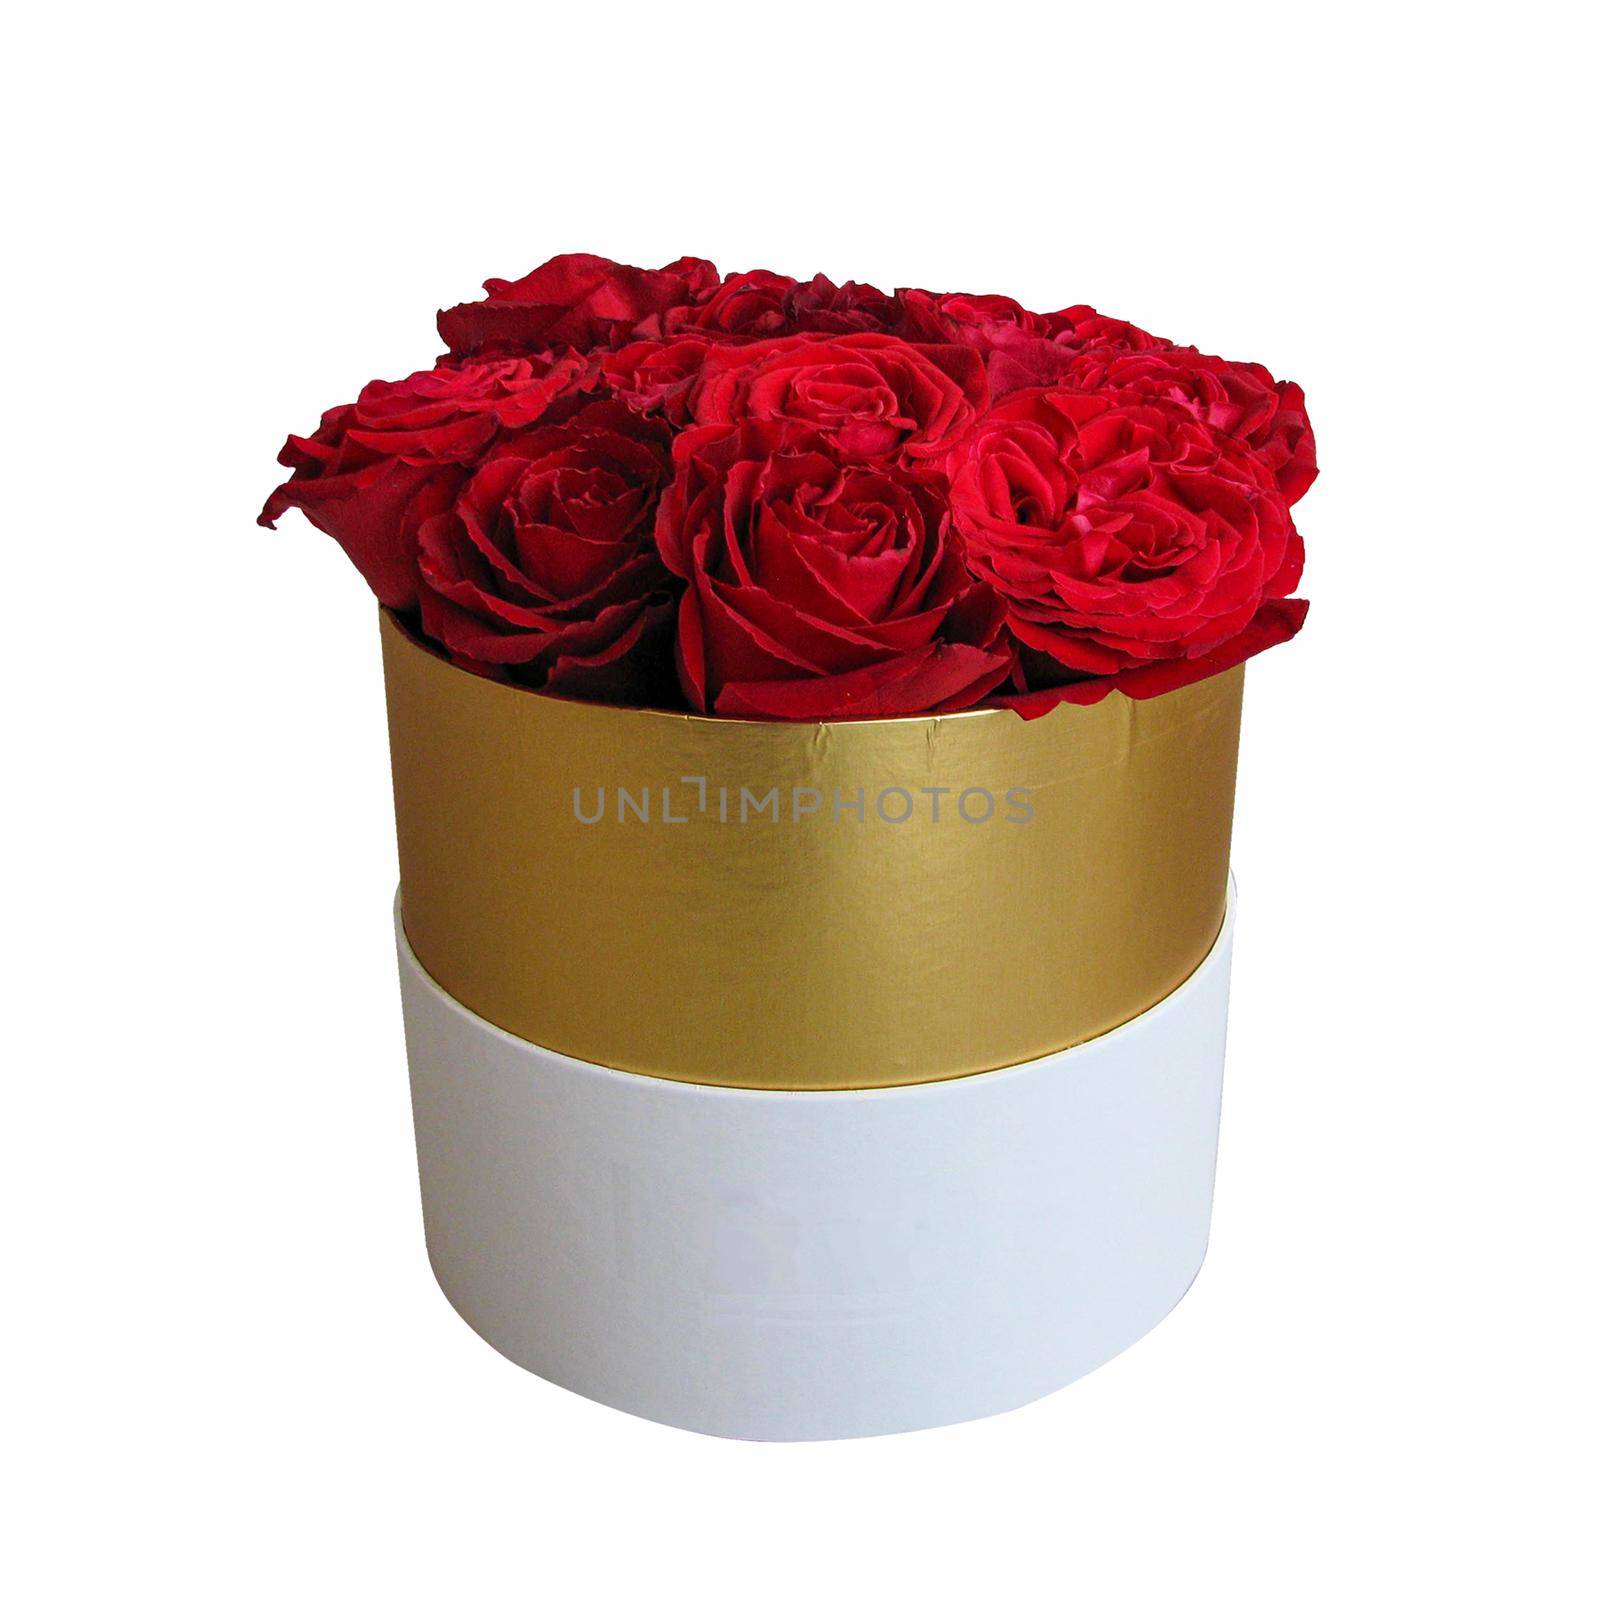 Red roses bouquet in a white and gold round gift box by Sofir